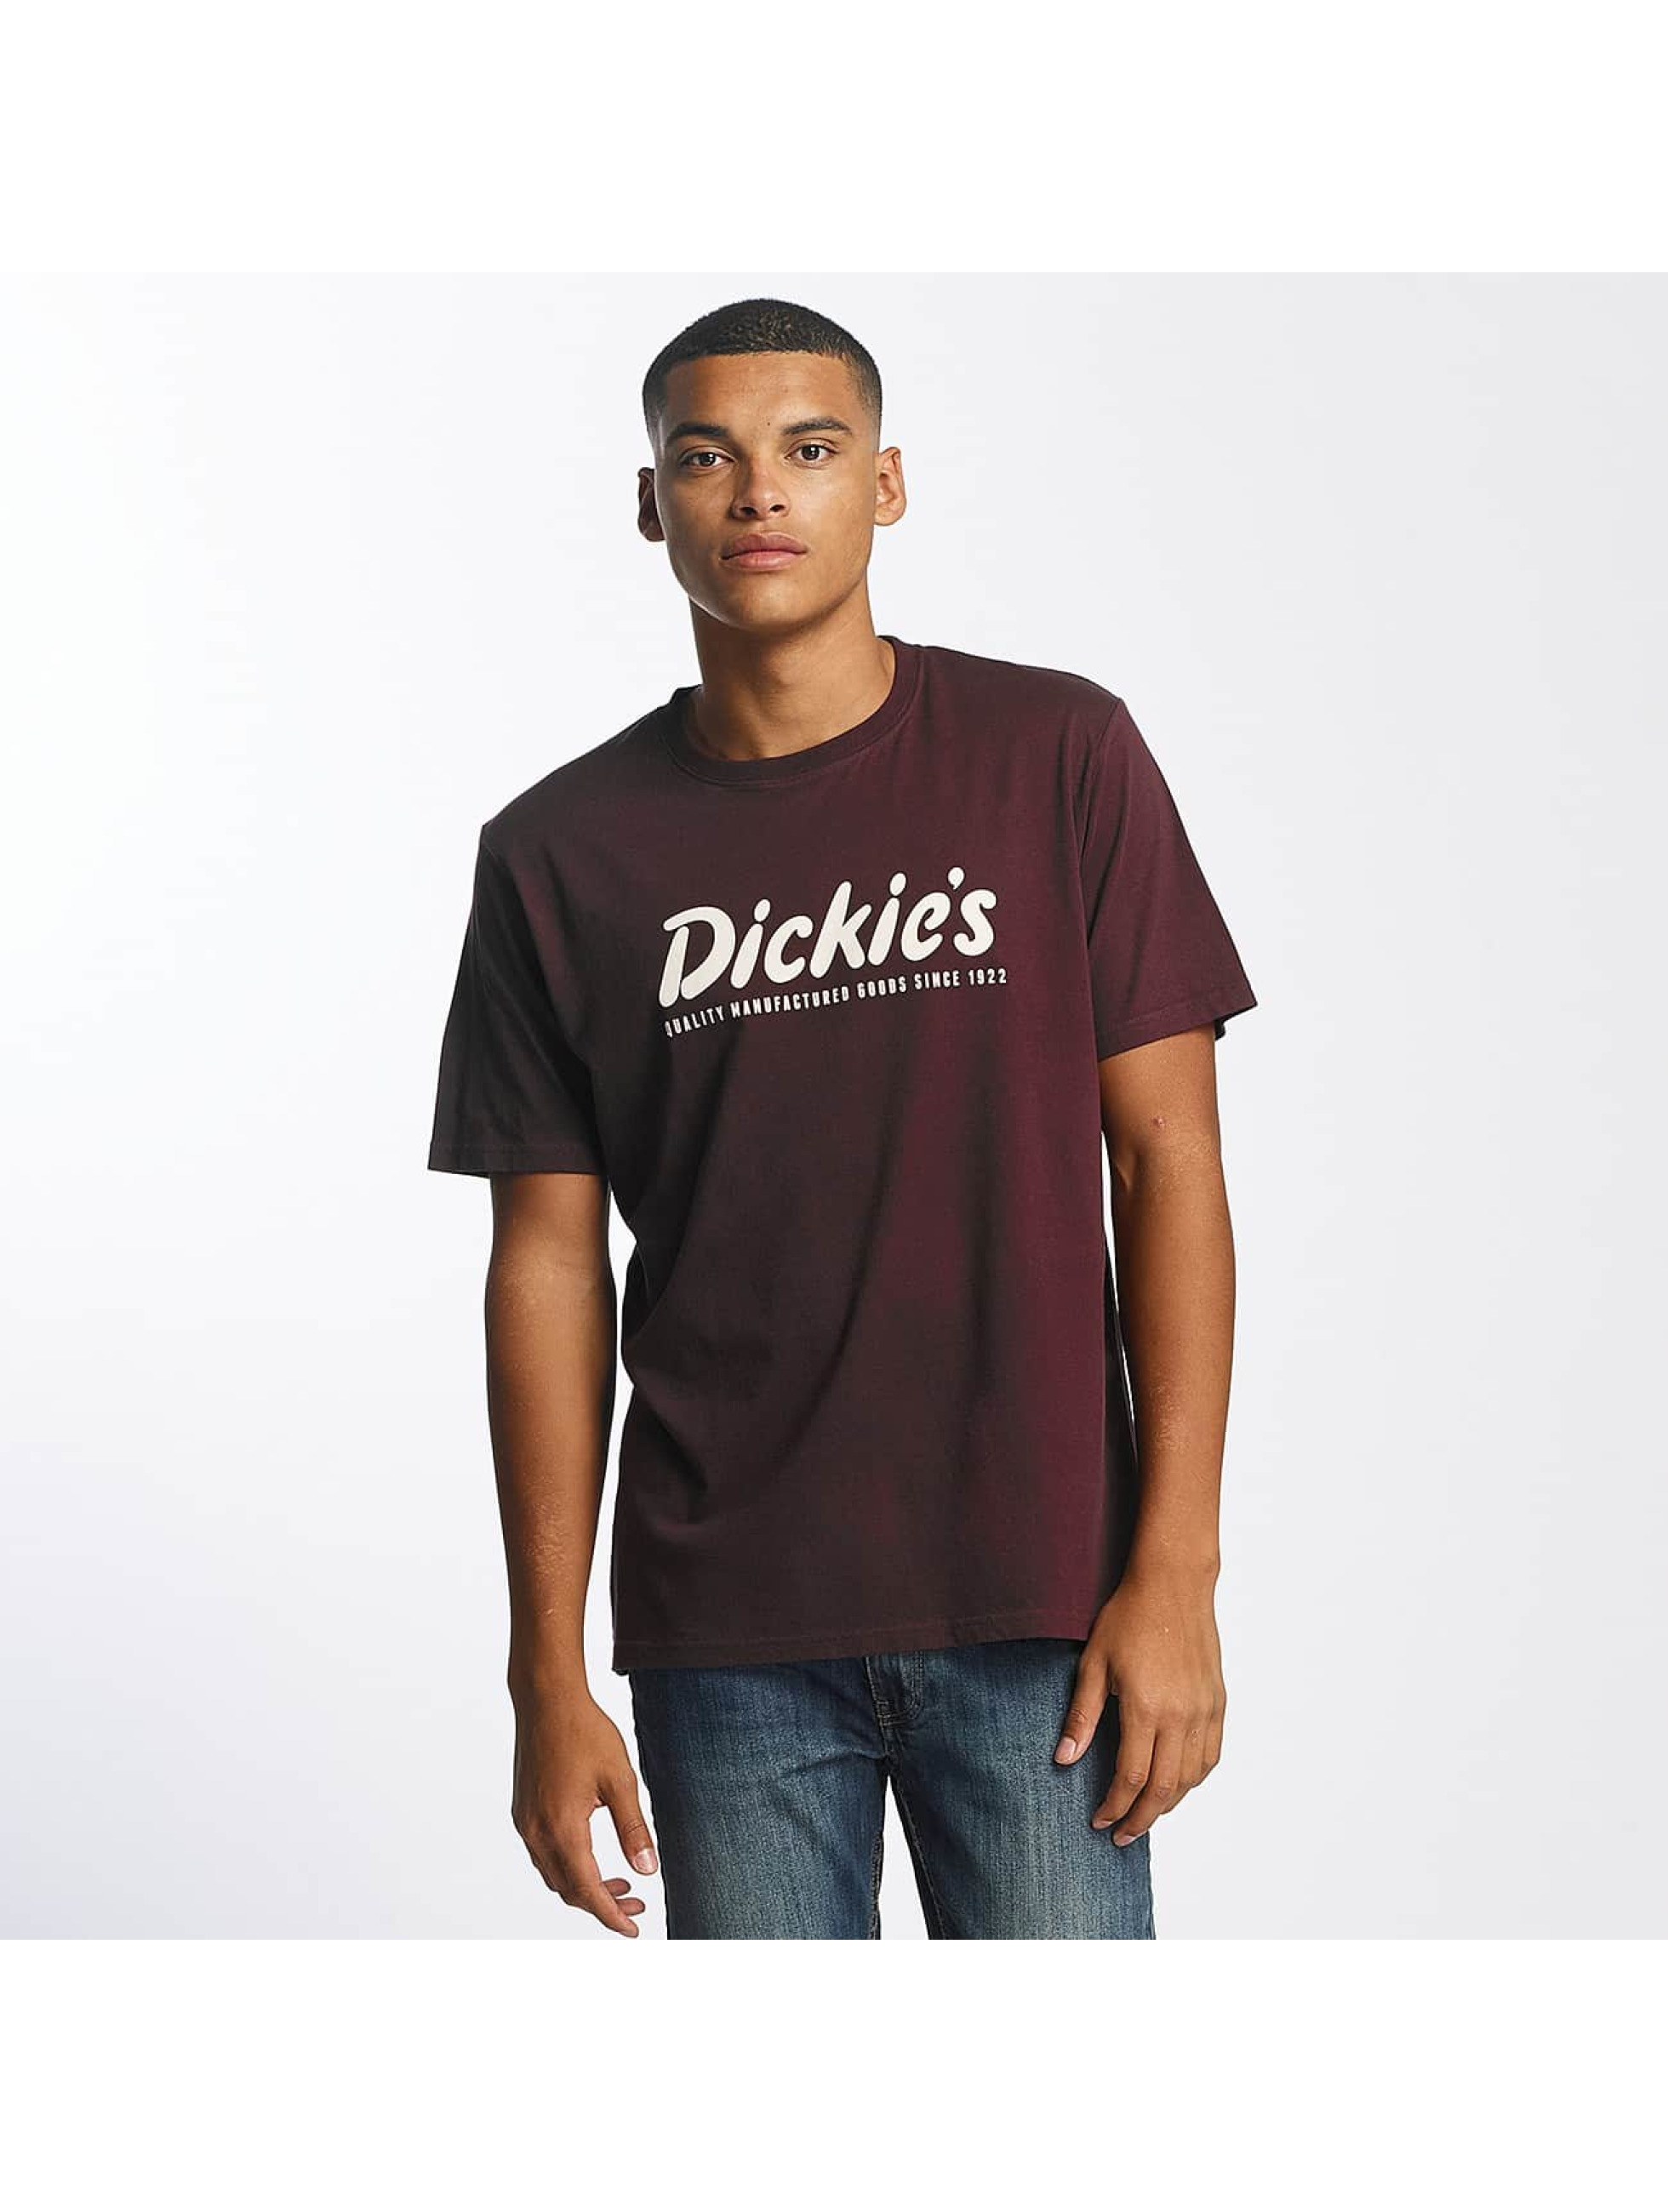 Dickies Ridley Park rouge T-Shirt homme